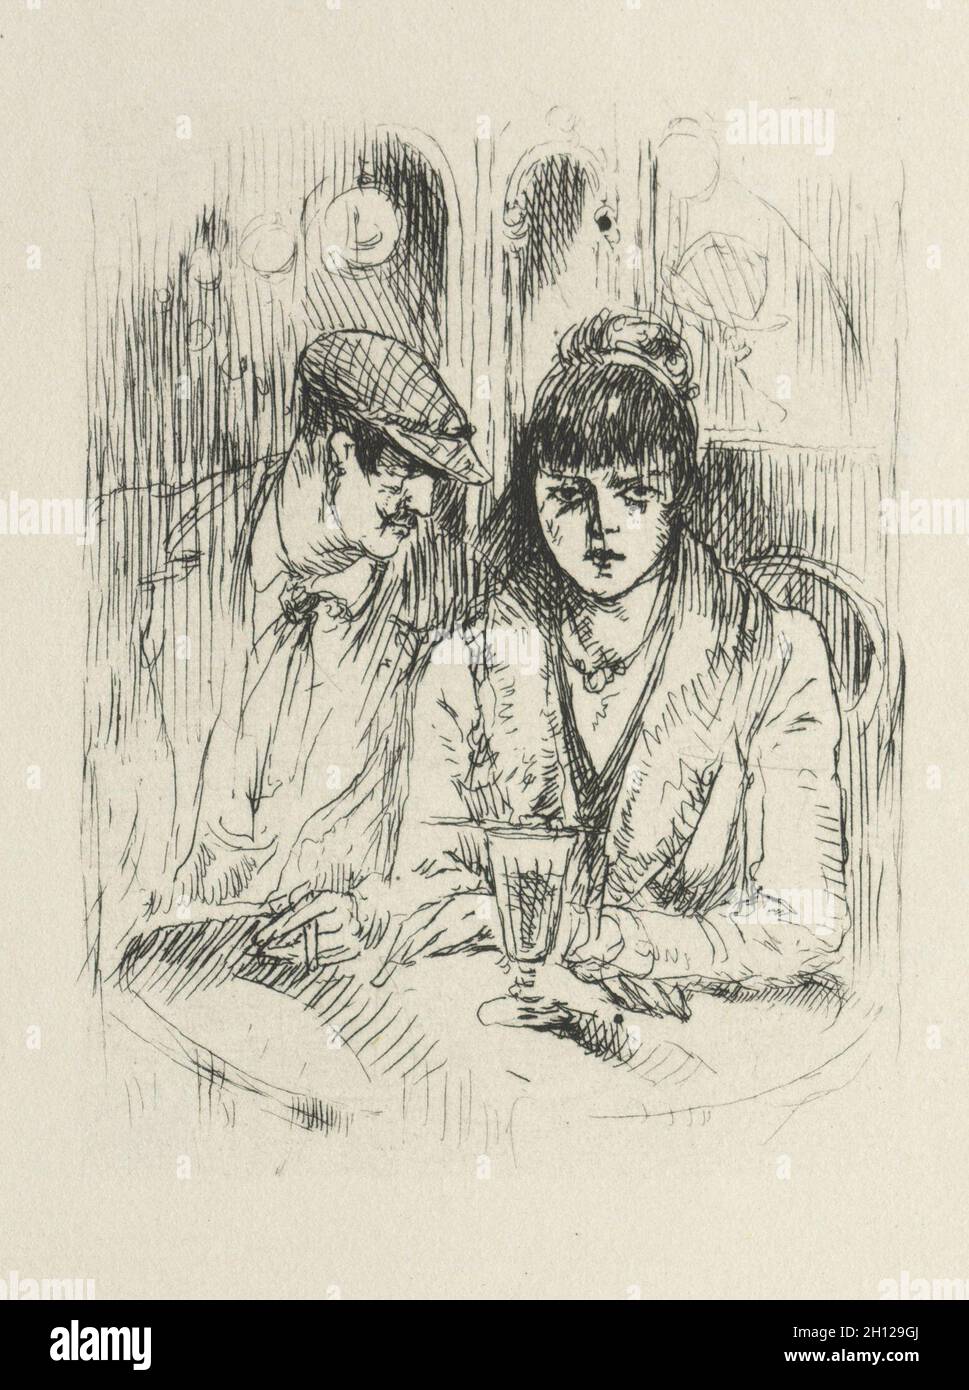 Le Drageoir aux épices by J. K. Huysmans: p. 26, 1929. Auguste Brouet (French, 1872-1941), J.K. Huysmans (French). Book containing 54 etchings; overall: 28.7 x 23.3 x 4.5 cm (11 5/16 x 9 3/16 x 1 3/4 in.). Stock Photo